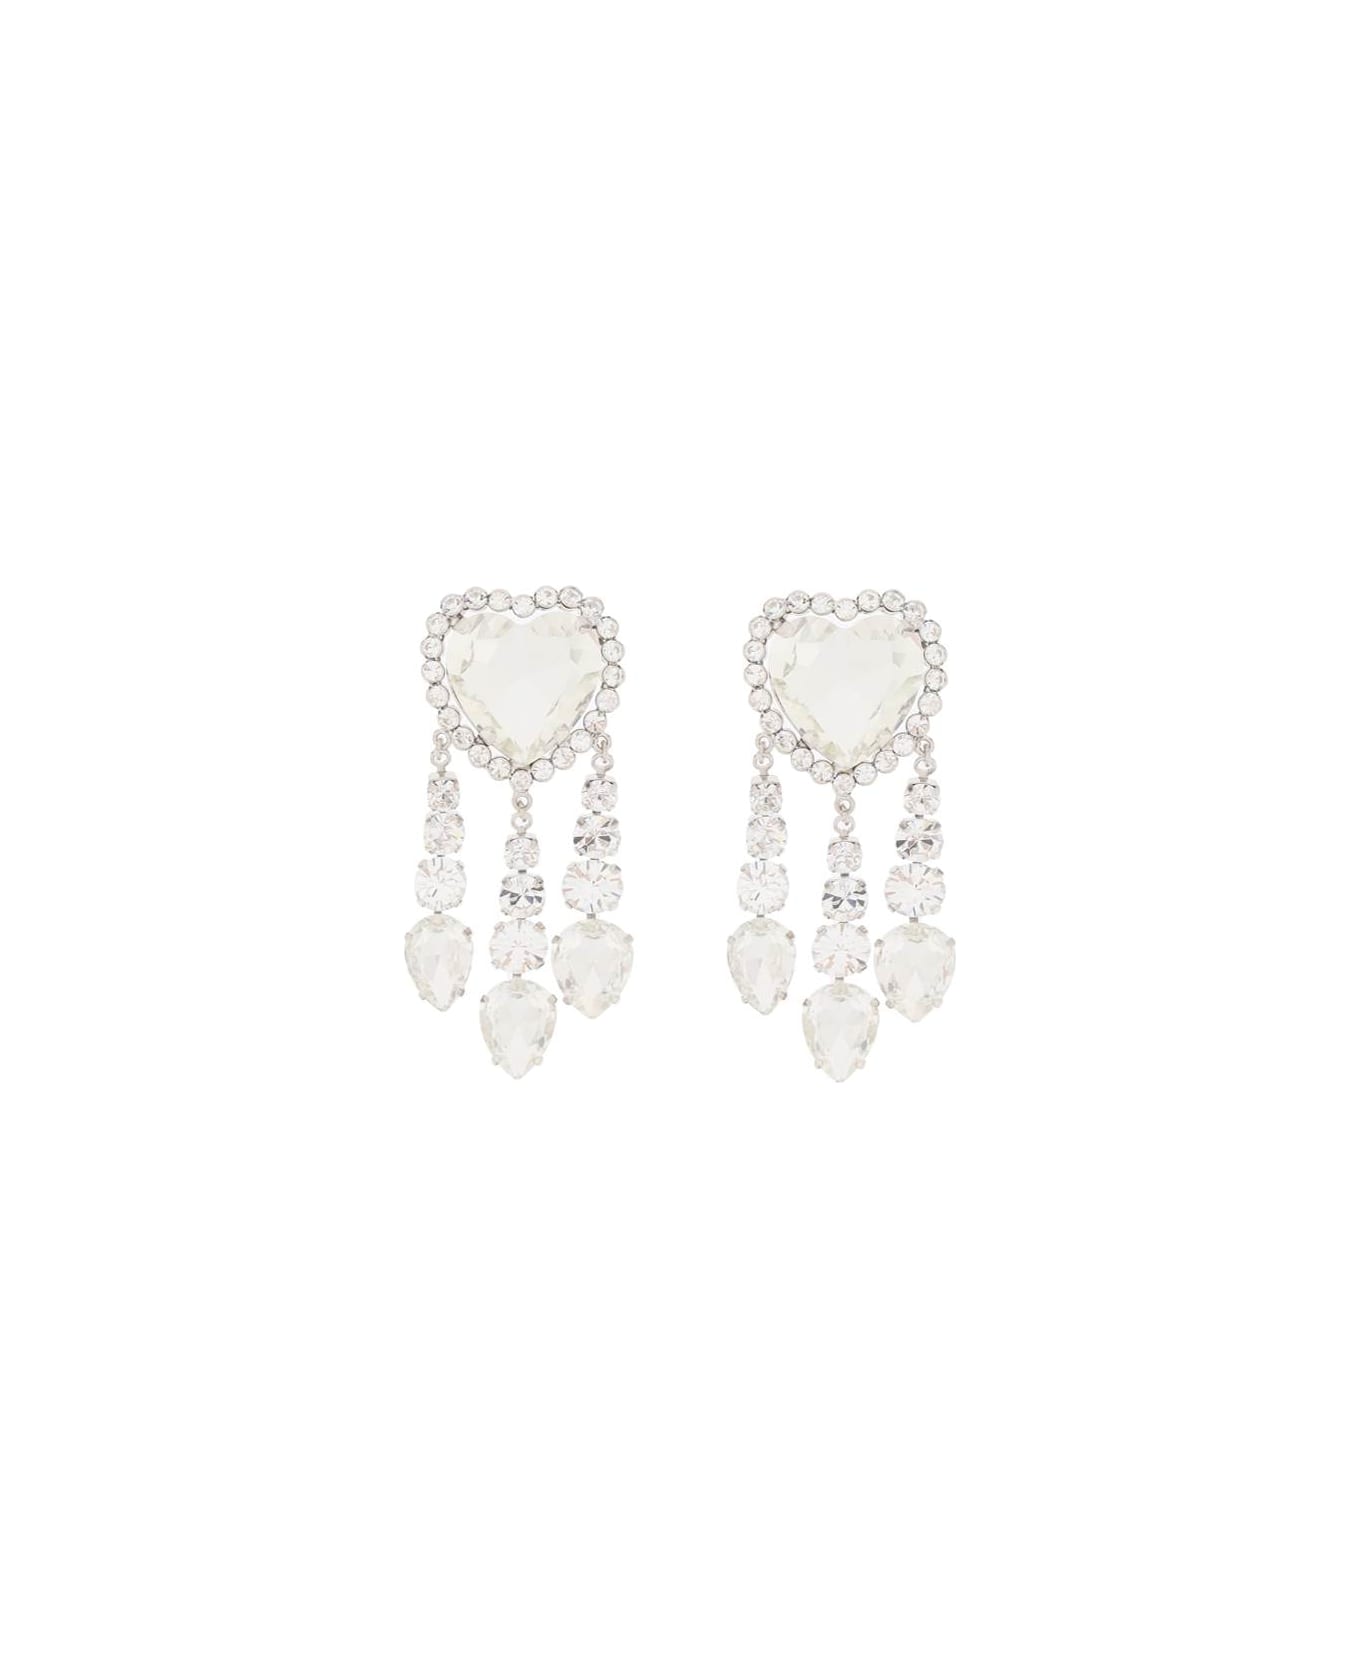 Alessandra Rich Heart Earrings With Pendants - CRYSTAL SILVER (Silver) イヤリング